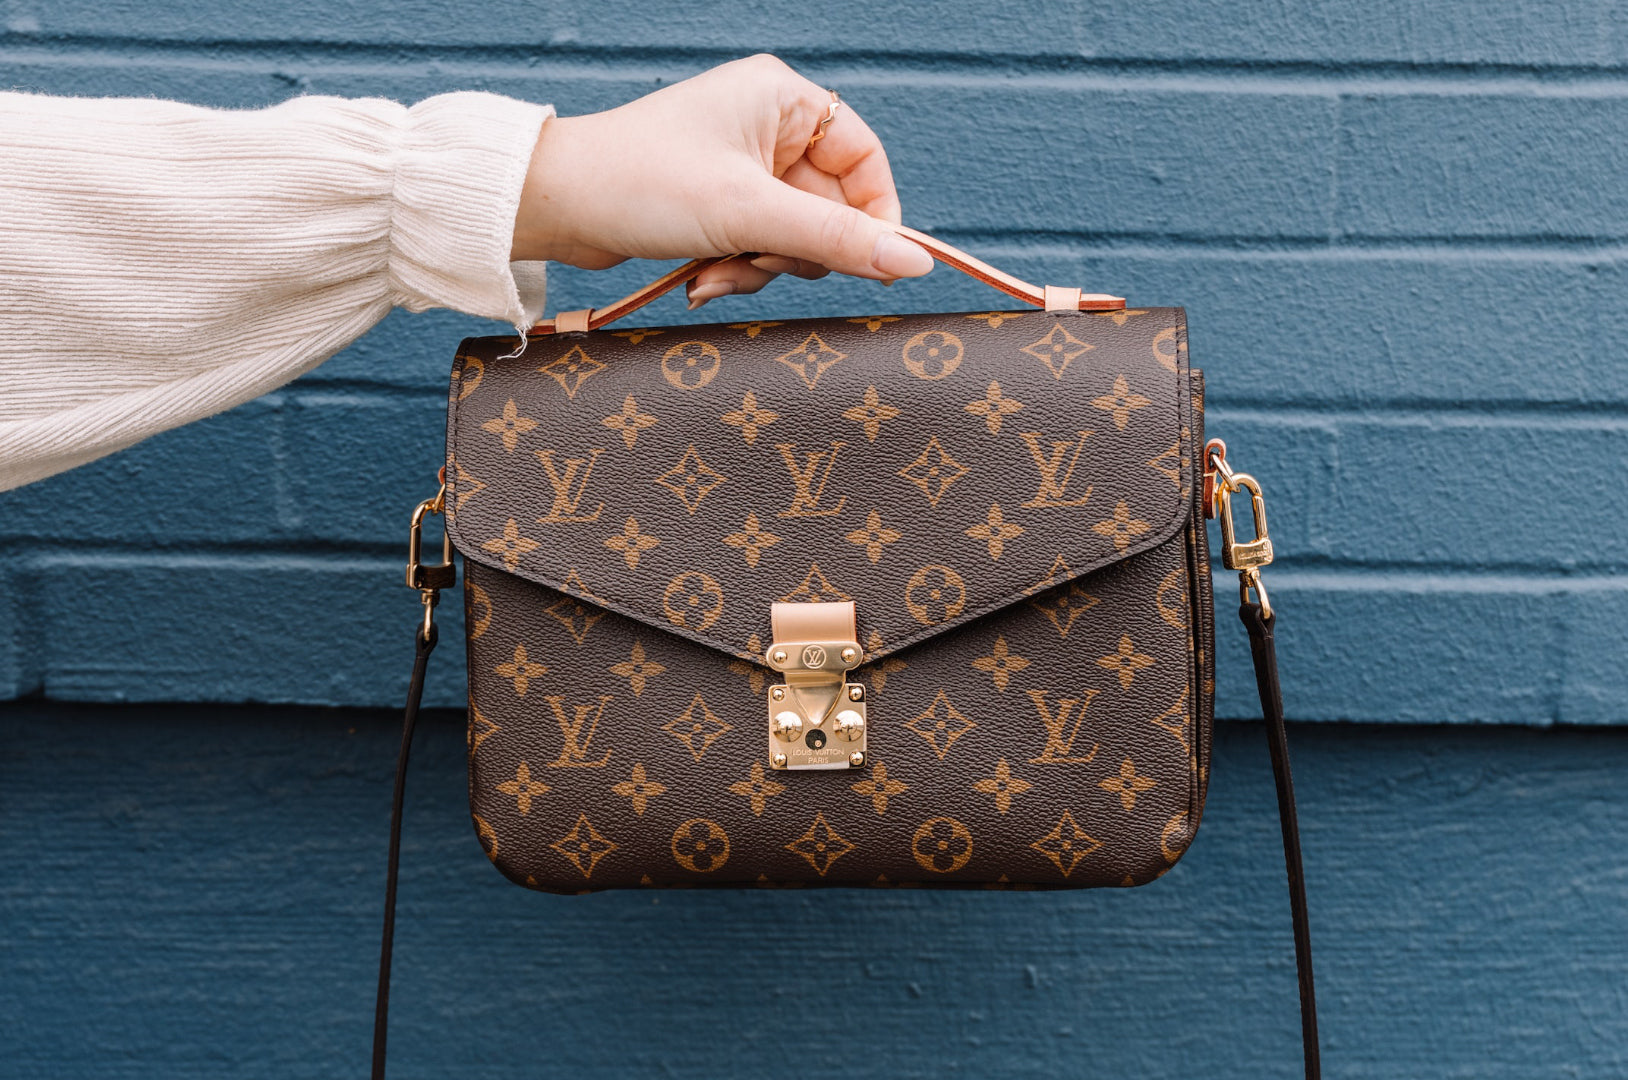 These New Louis Vuitton Twist Bags Are Versatile and Eye-Catching